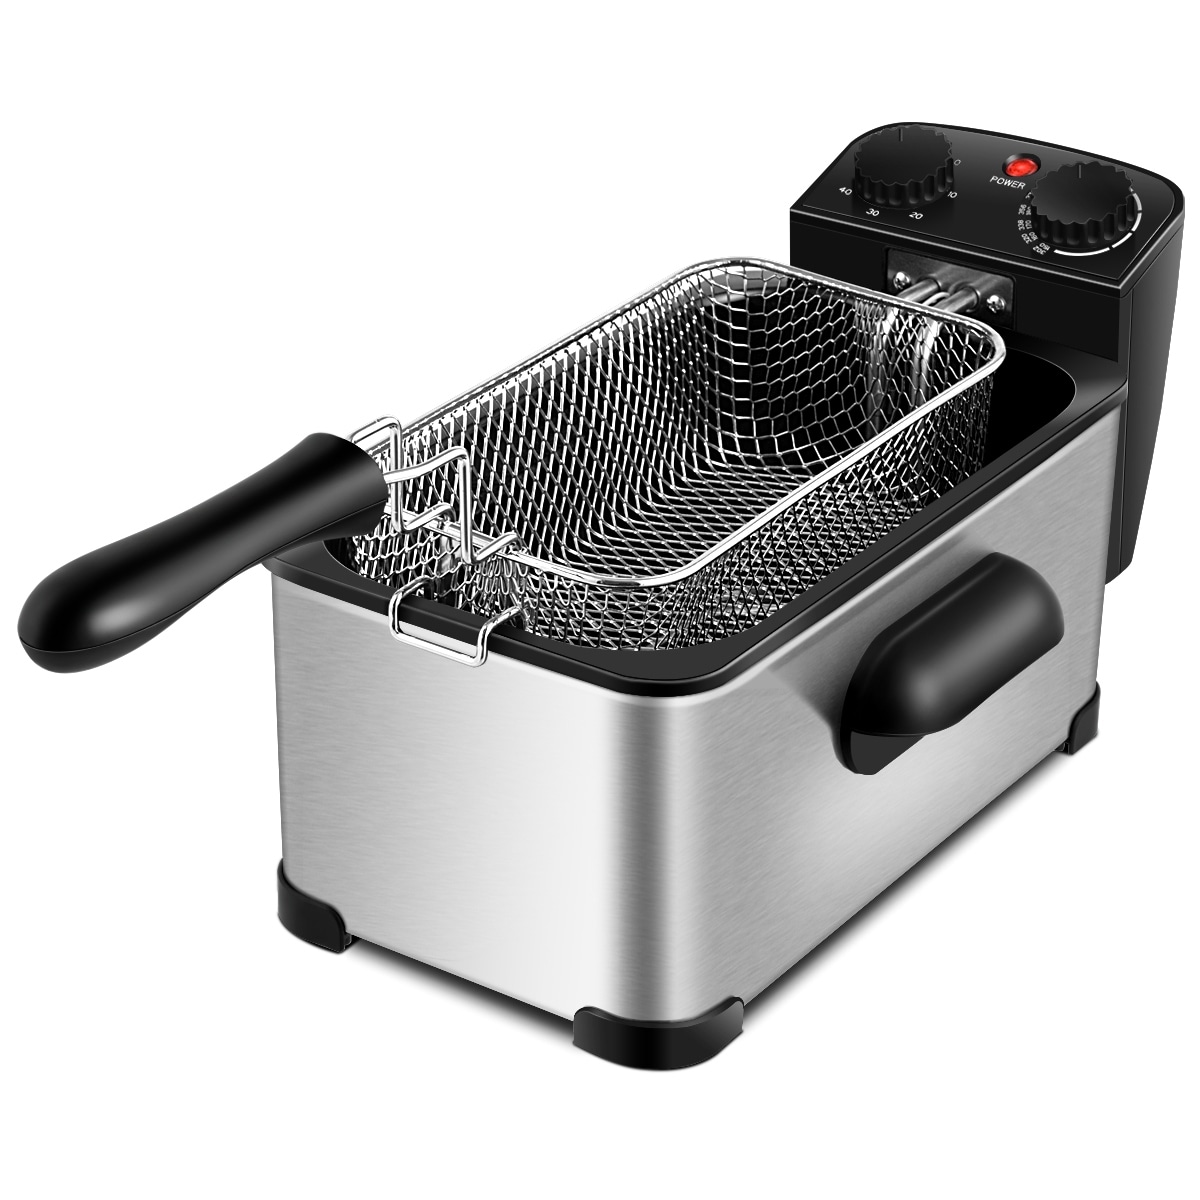 Costway 5.3 QT Electric Hot Air Fryer 1700W Stainless steel Non